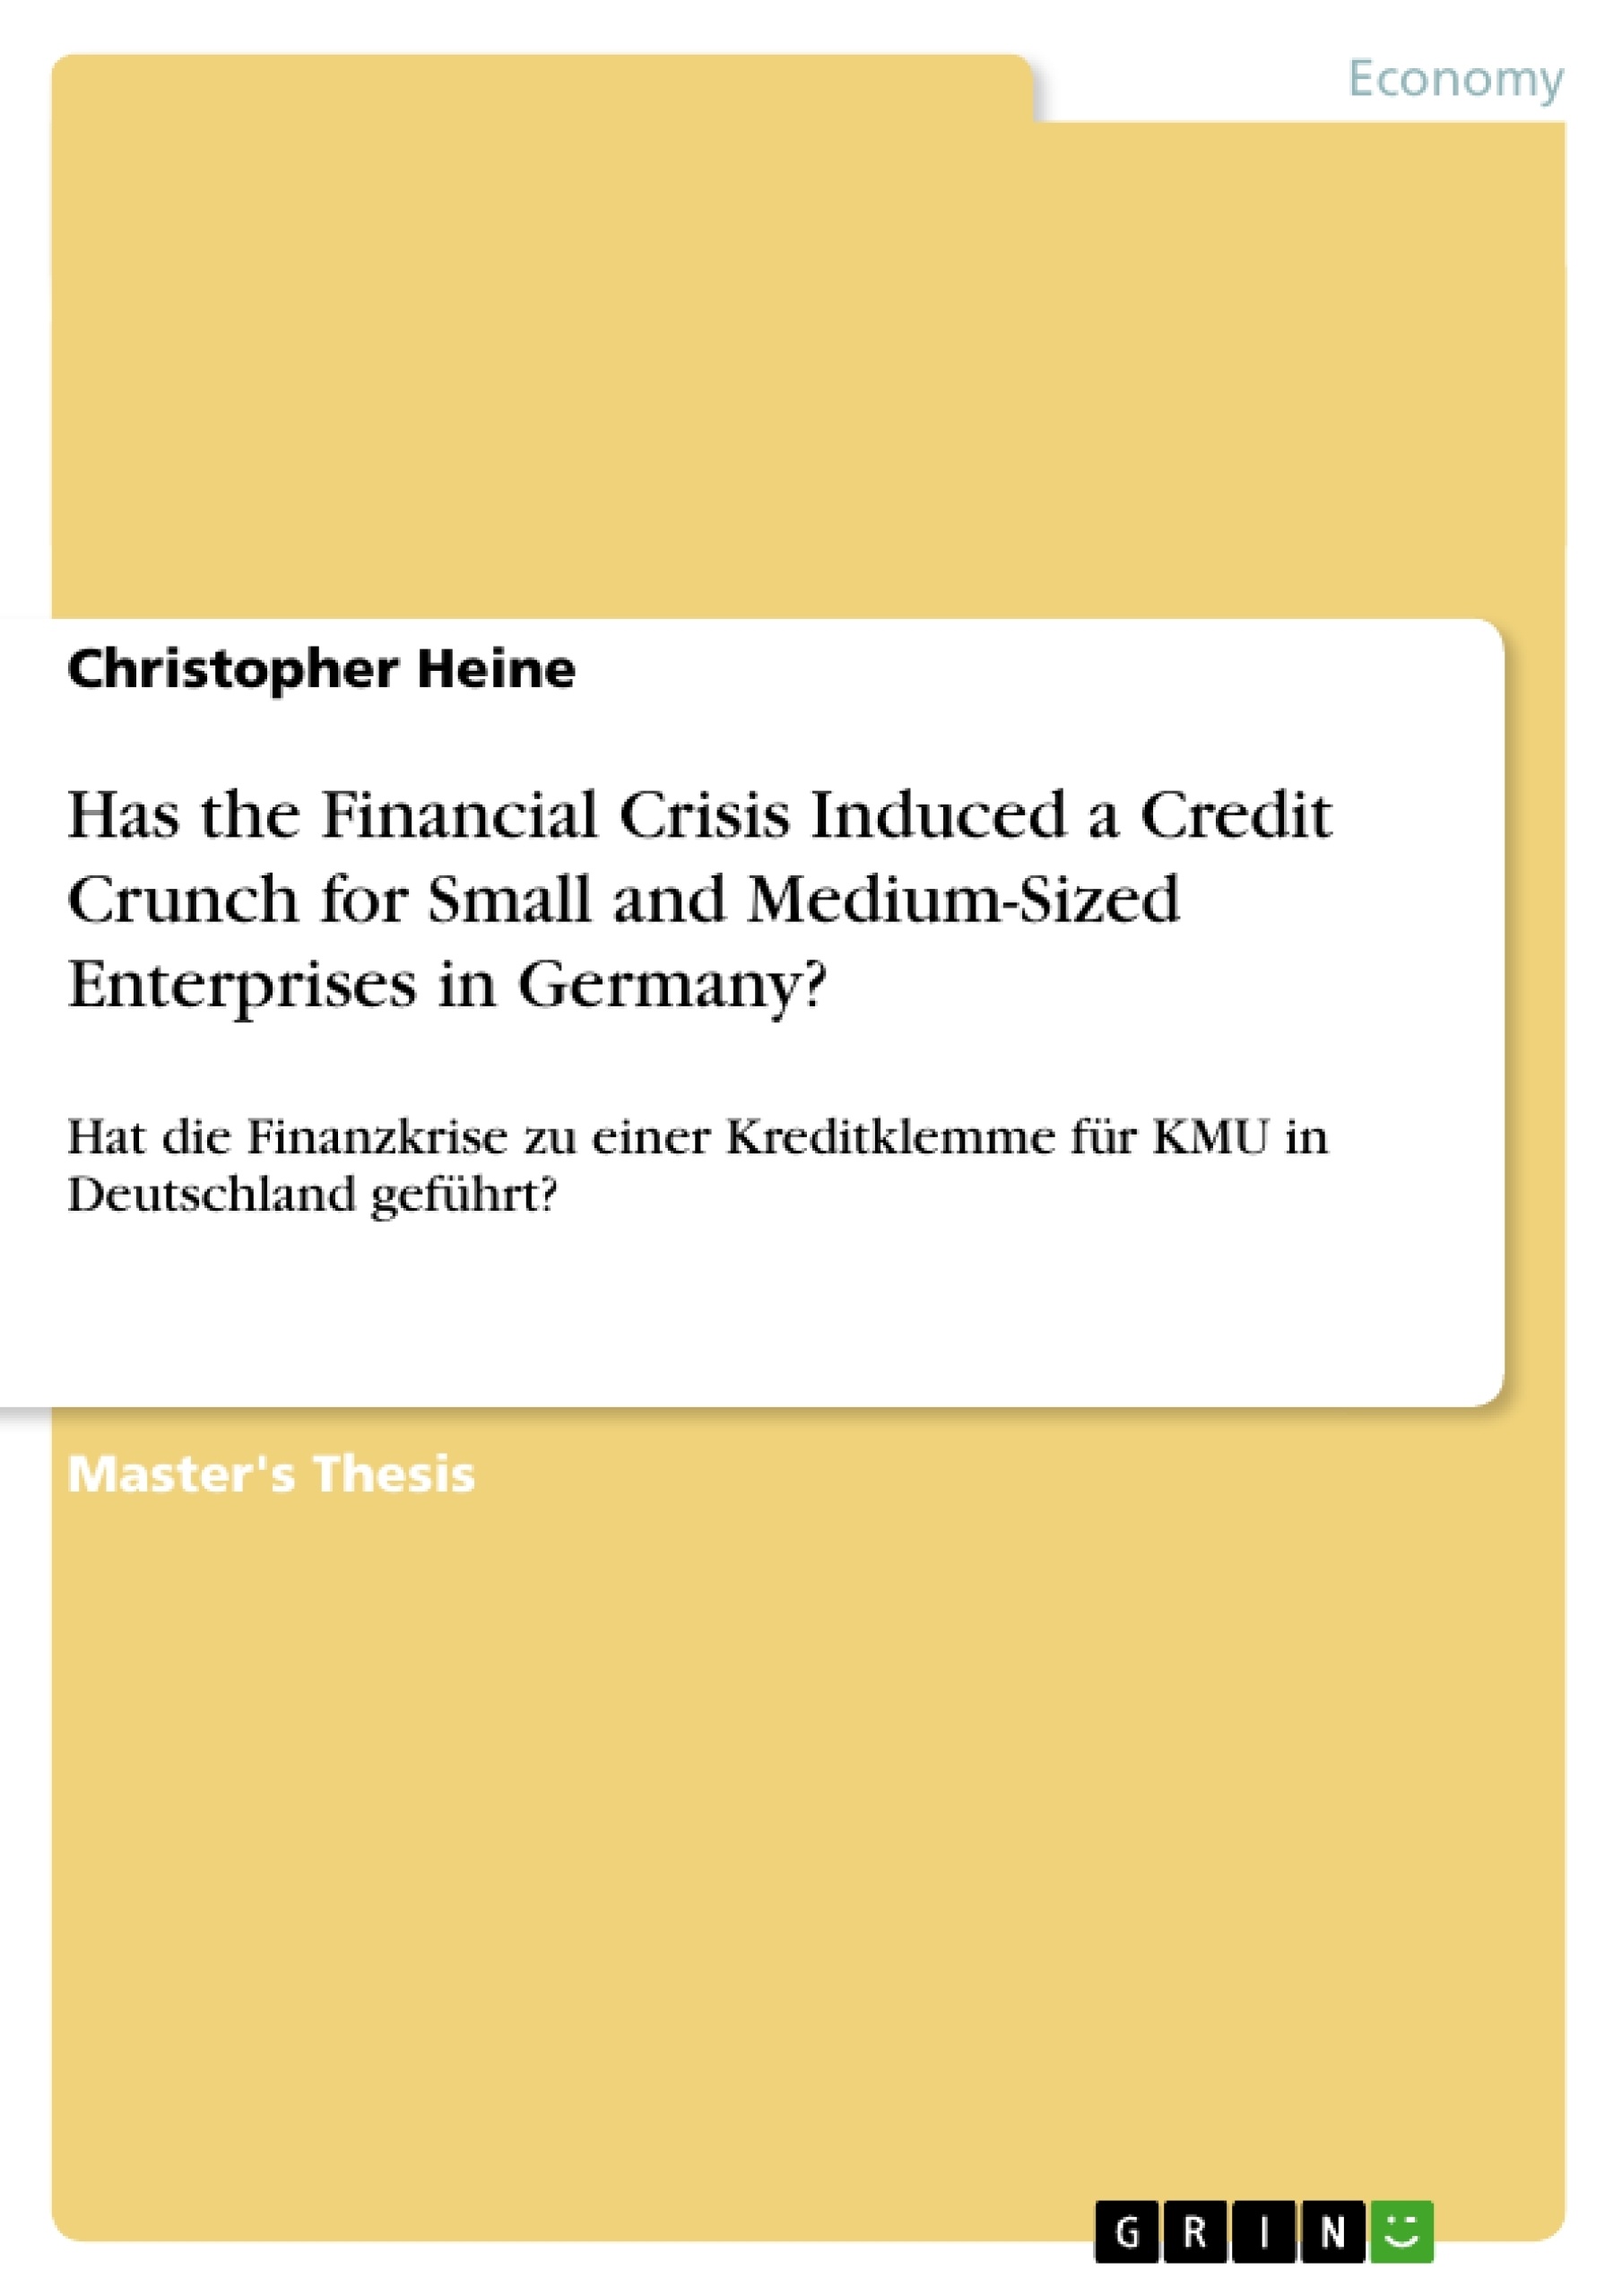 Title: Has the Financial Crisis Induced a Credit Crunch for Small and Medium-Sized Enterprises in Germany?